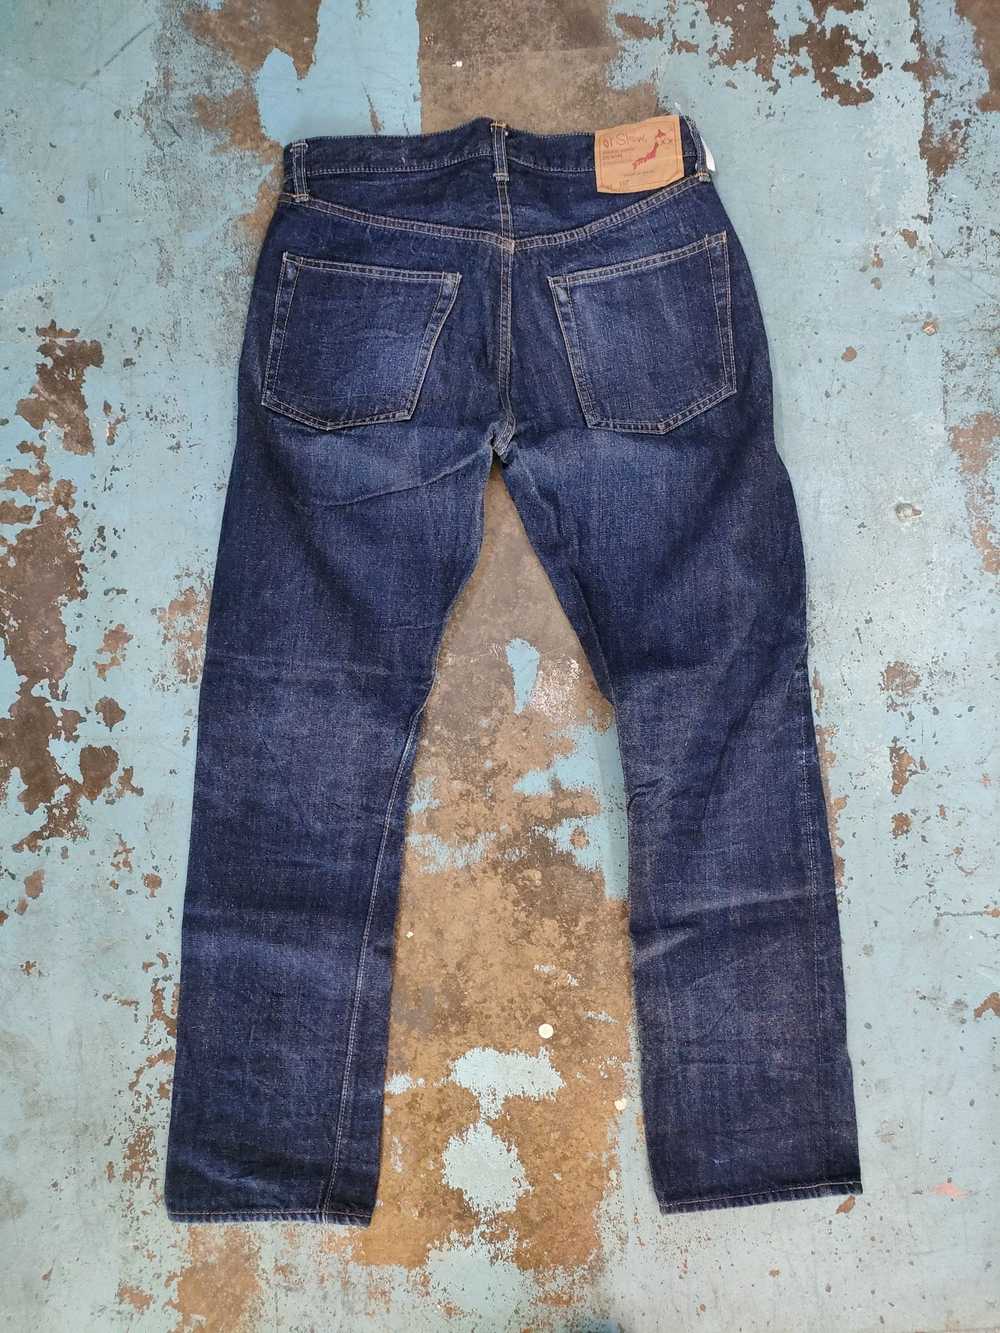 Japanese Brand Or Slow Japan Selvedge Jeans - image 3